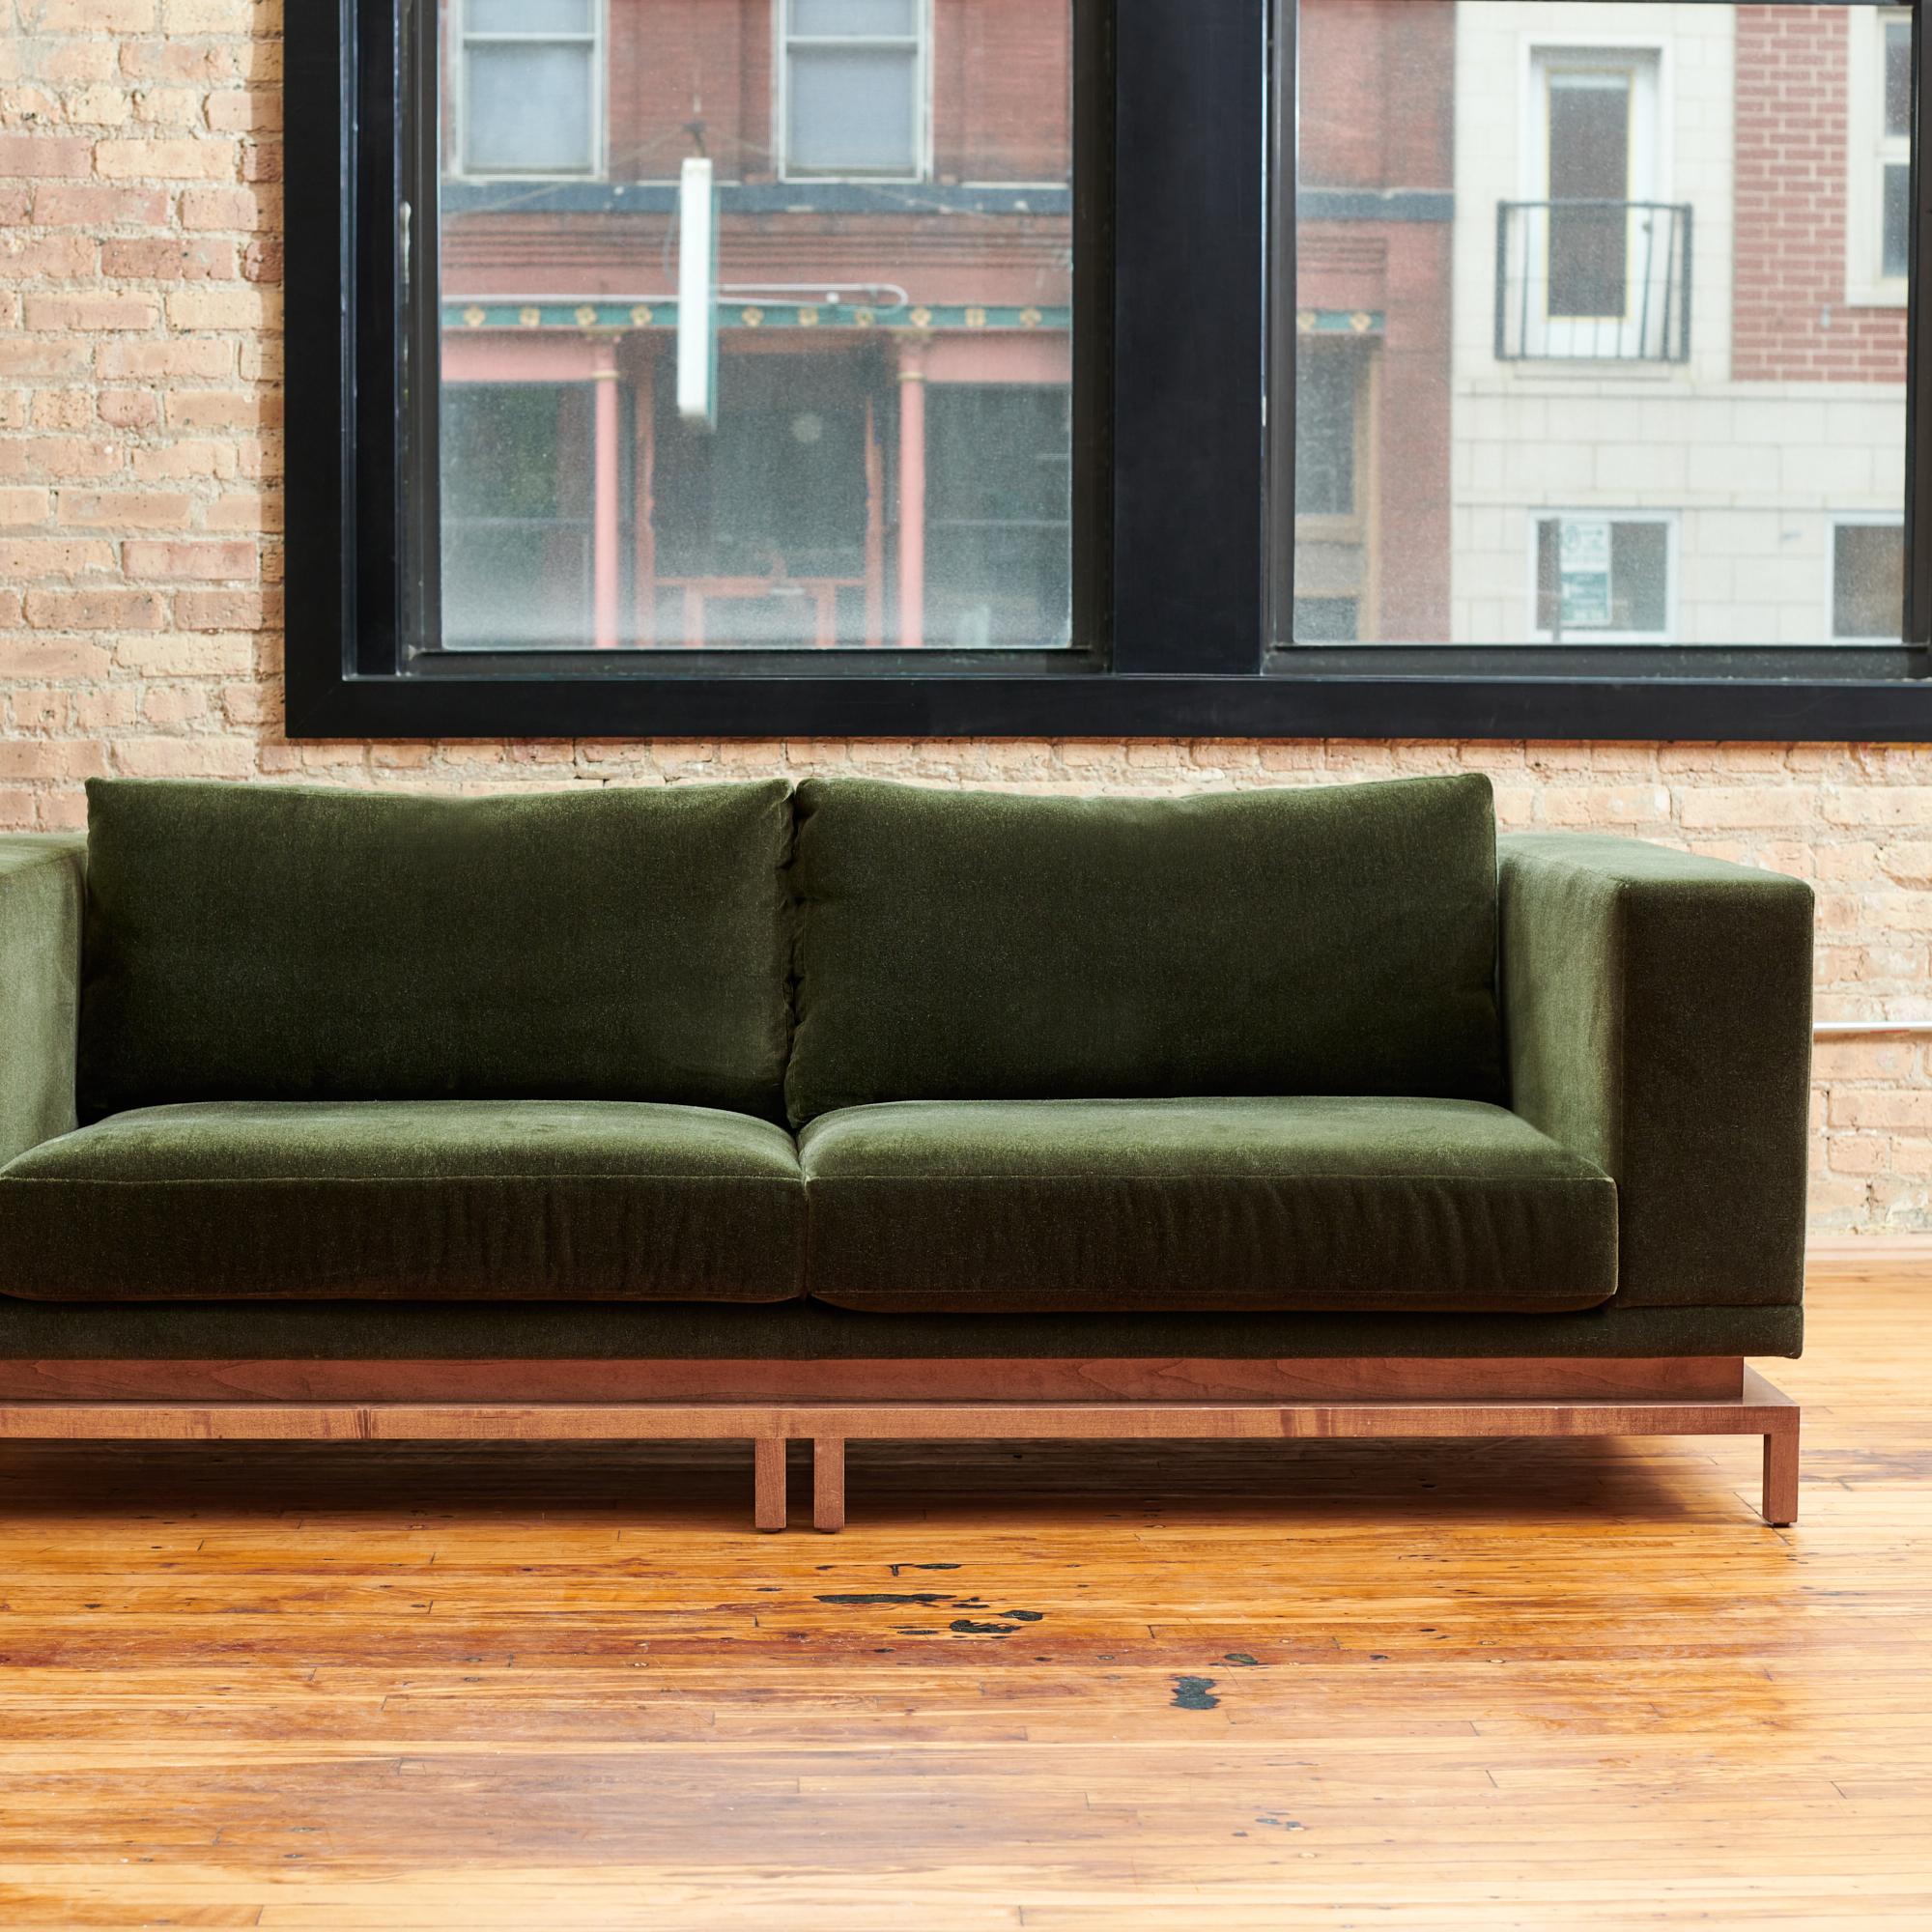 Custom Contemporary Sofa Green Mohair Walnut Base Gil Melott Bespoke In New Condition For Sale In Chicago, IL